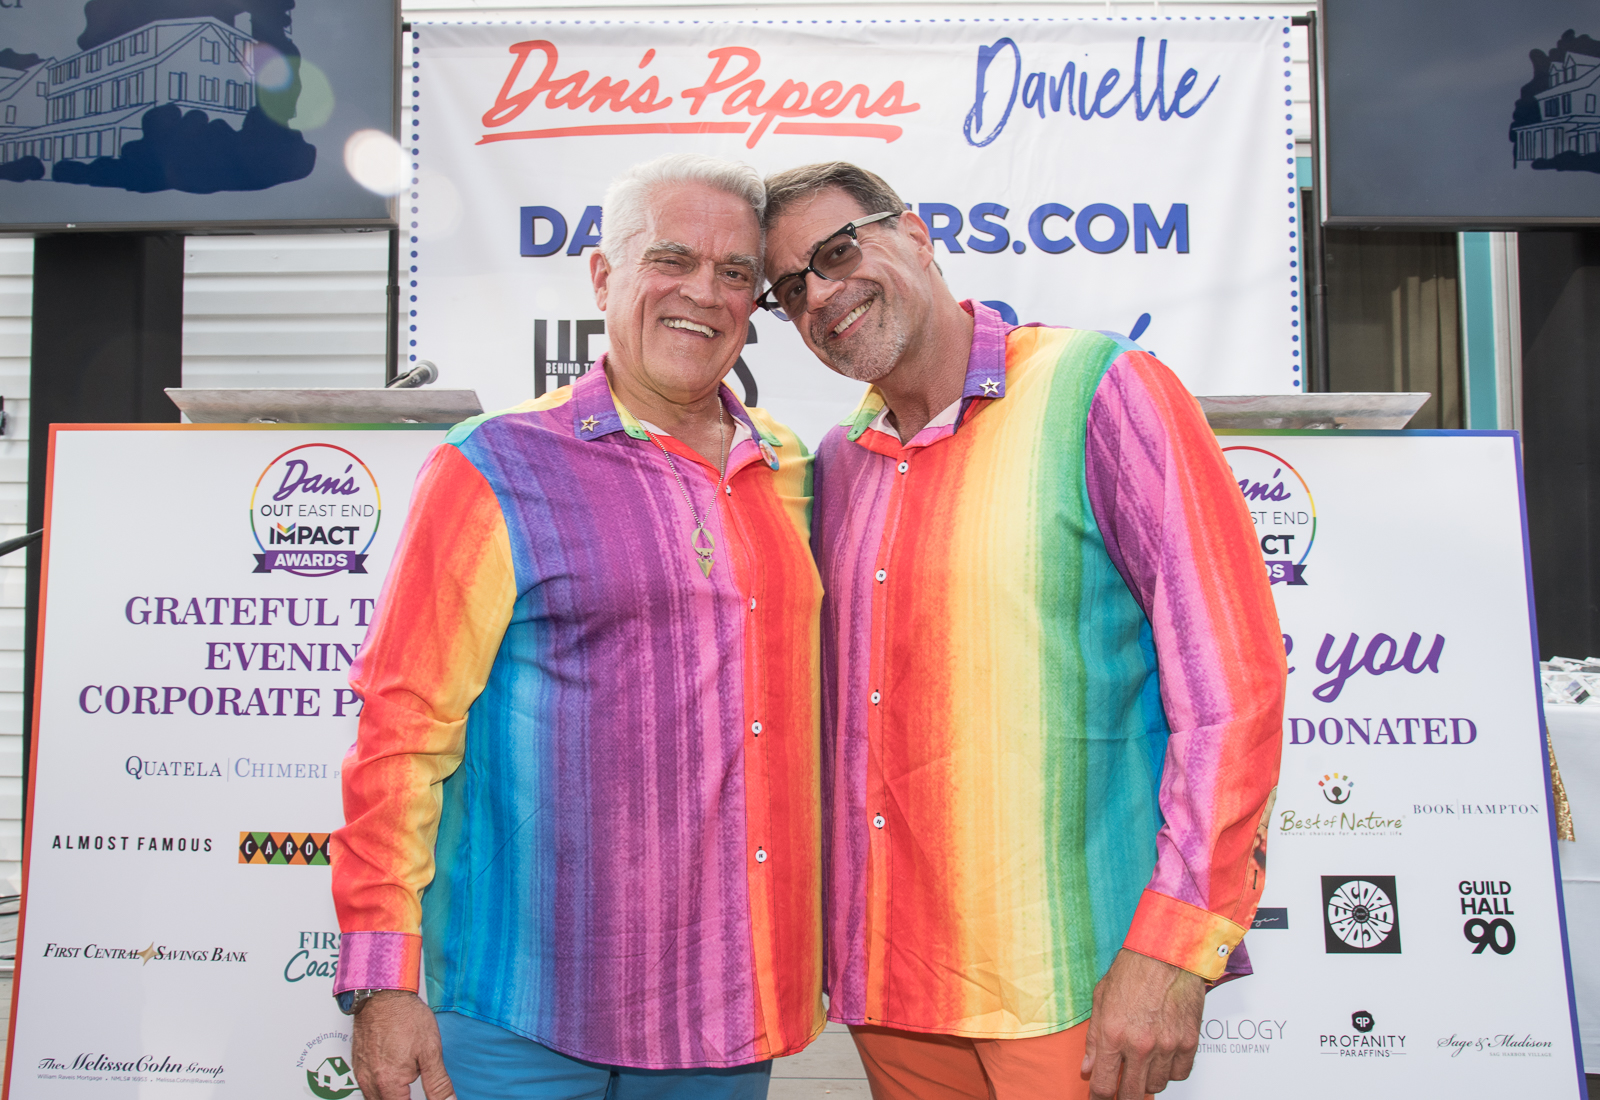 Jimmy Mack and Brian Mott were the best dressed at the Impact Awards!